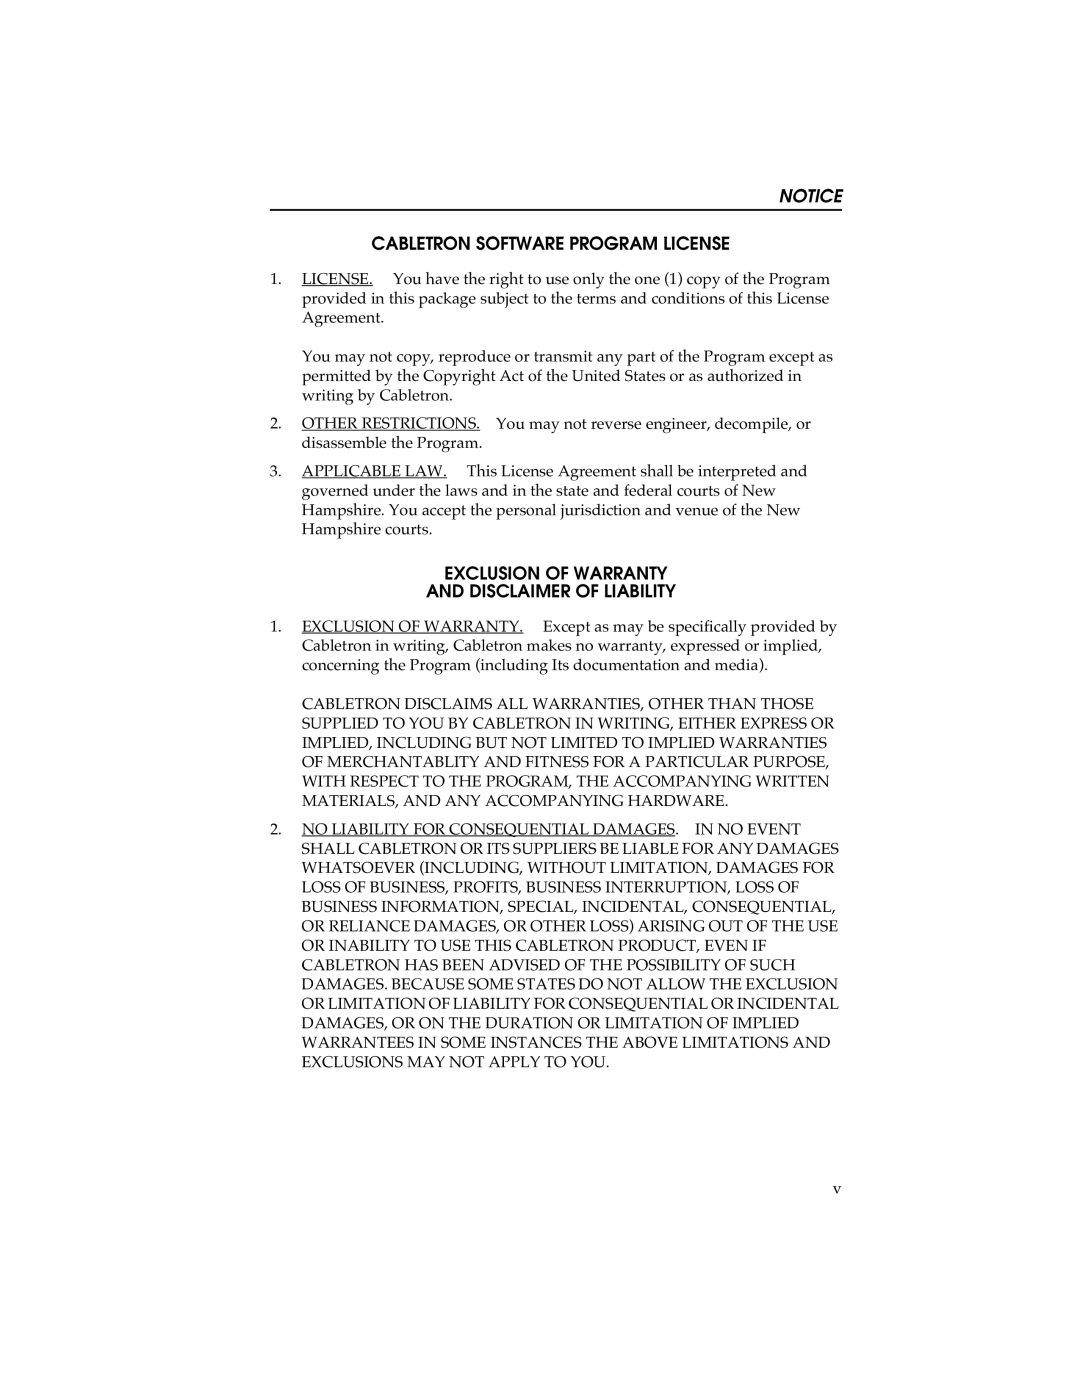 Cabletron Systems STHI manual Cabletron Software Program License, Exclusion Of Warranty, And Disclaimer Of Liability 